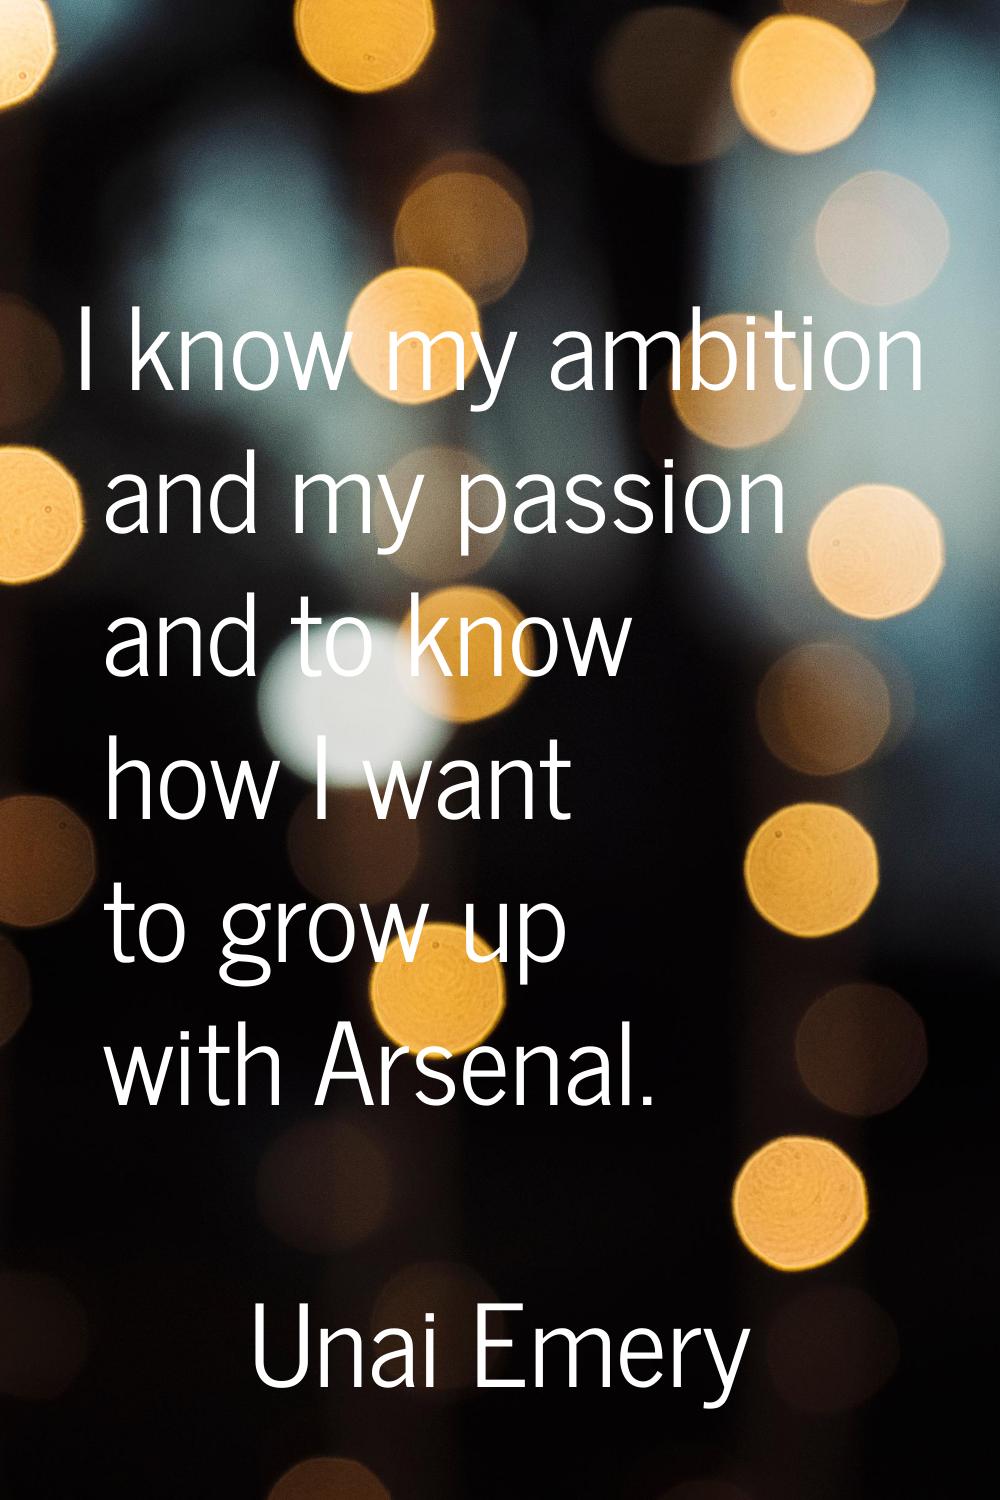 I know my ambition and my passion and to know how I want to grow up with Arsenal.